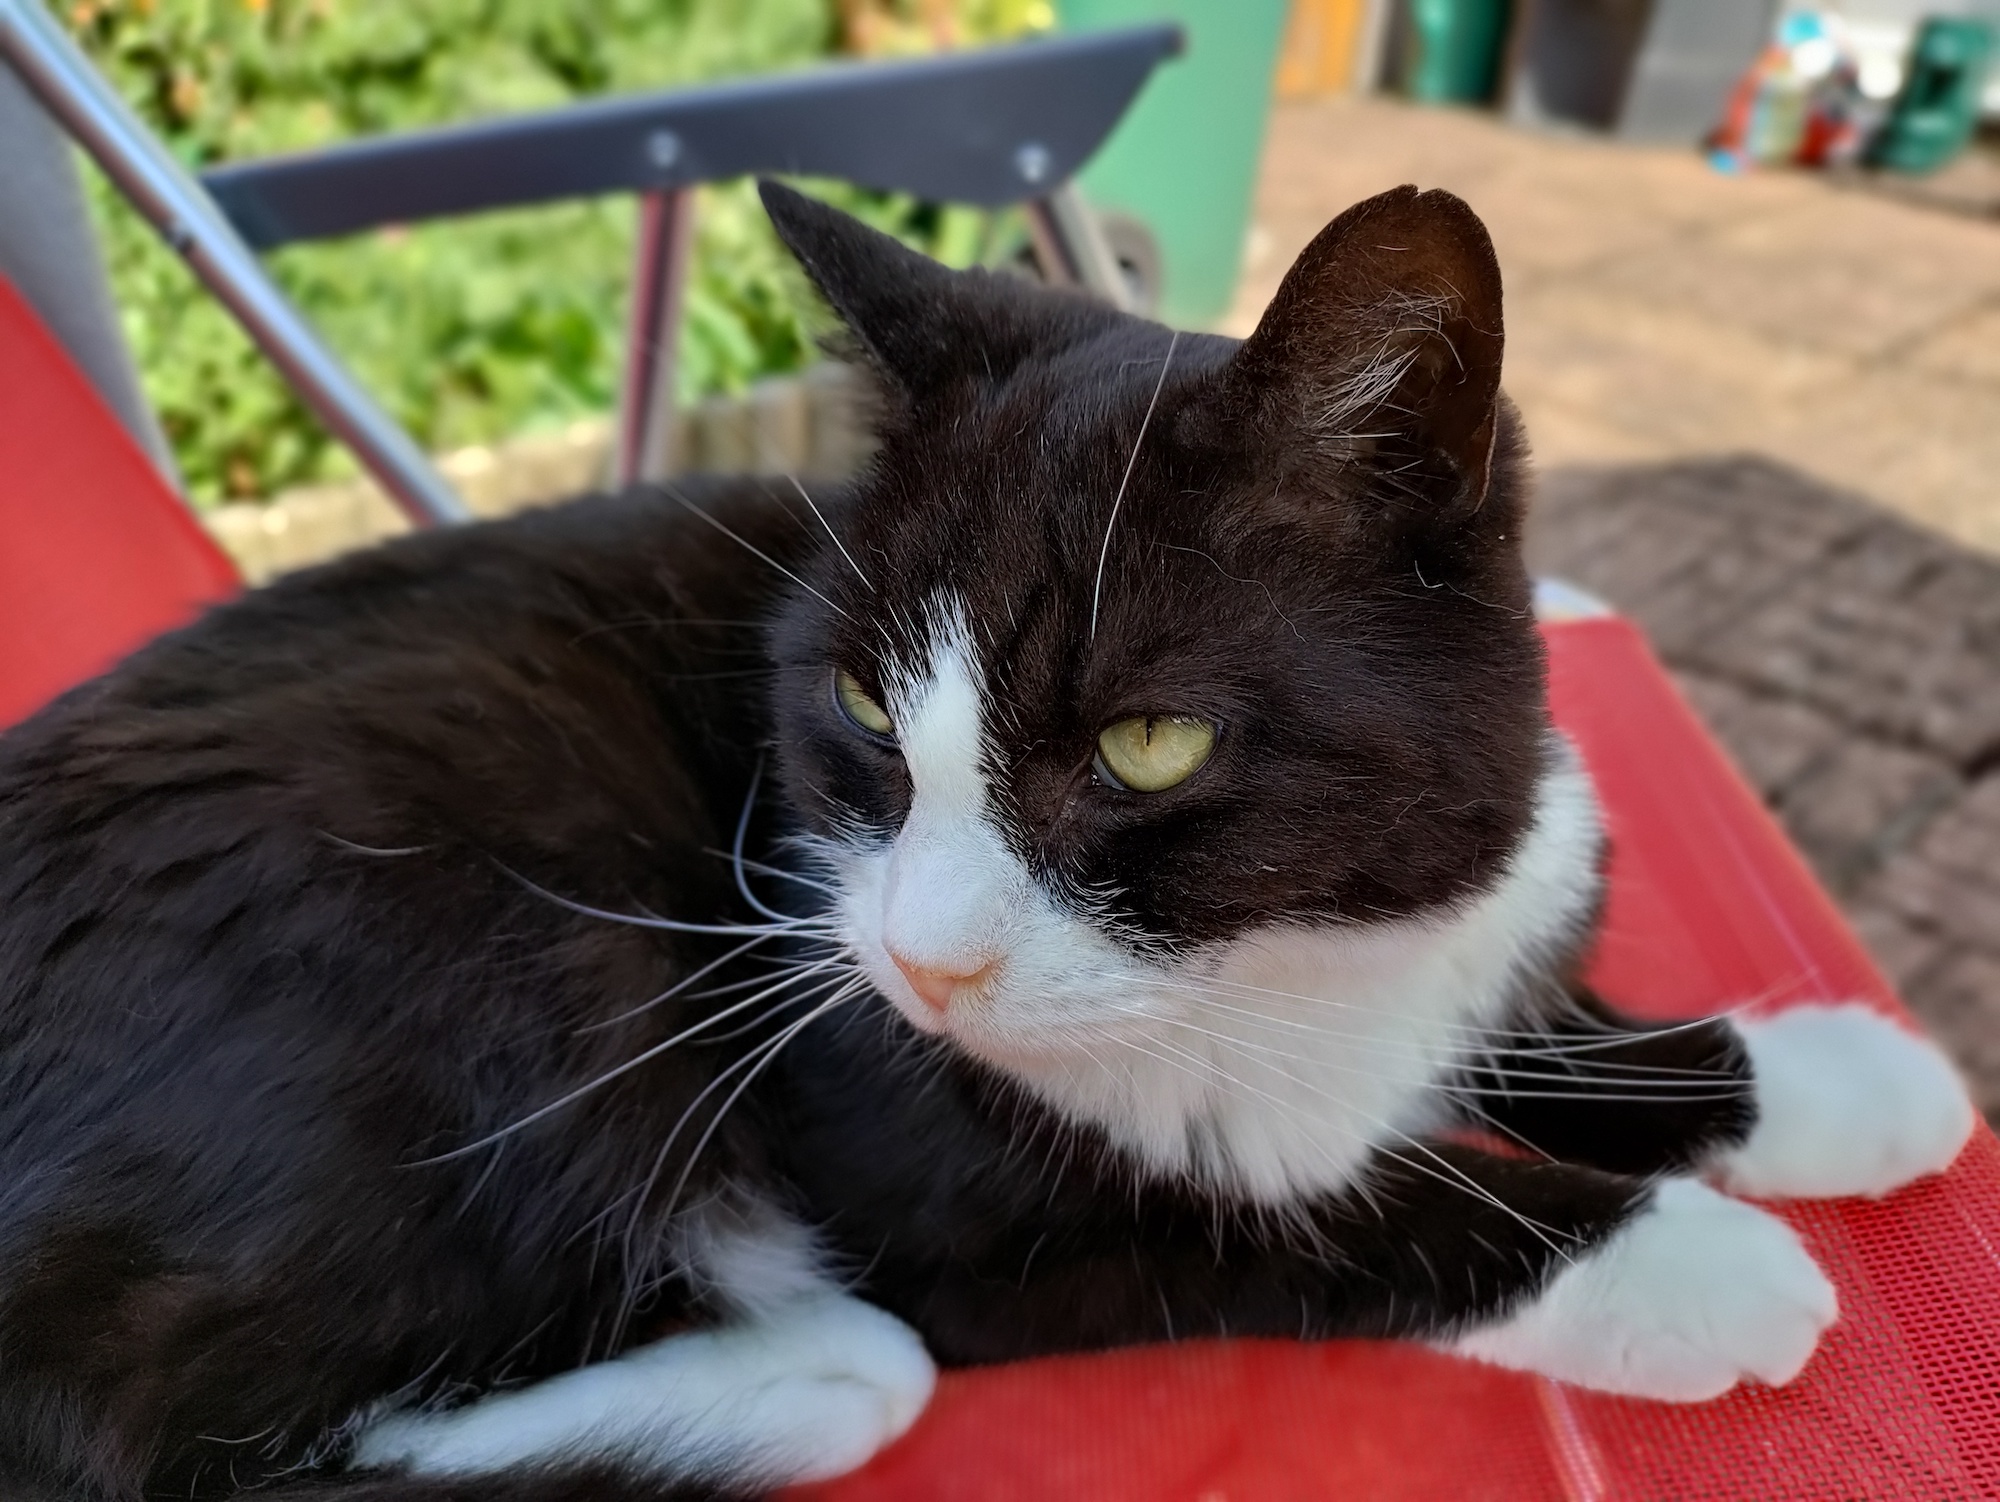 oneplus nord ce 5g review cat bokeh